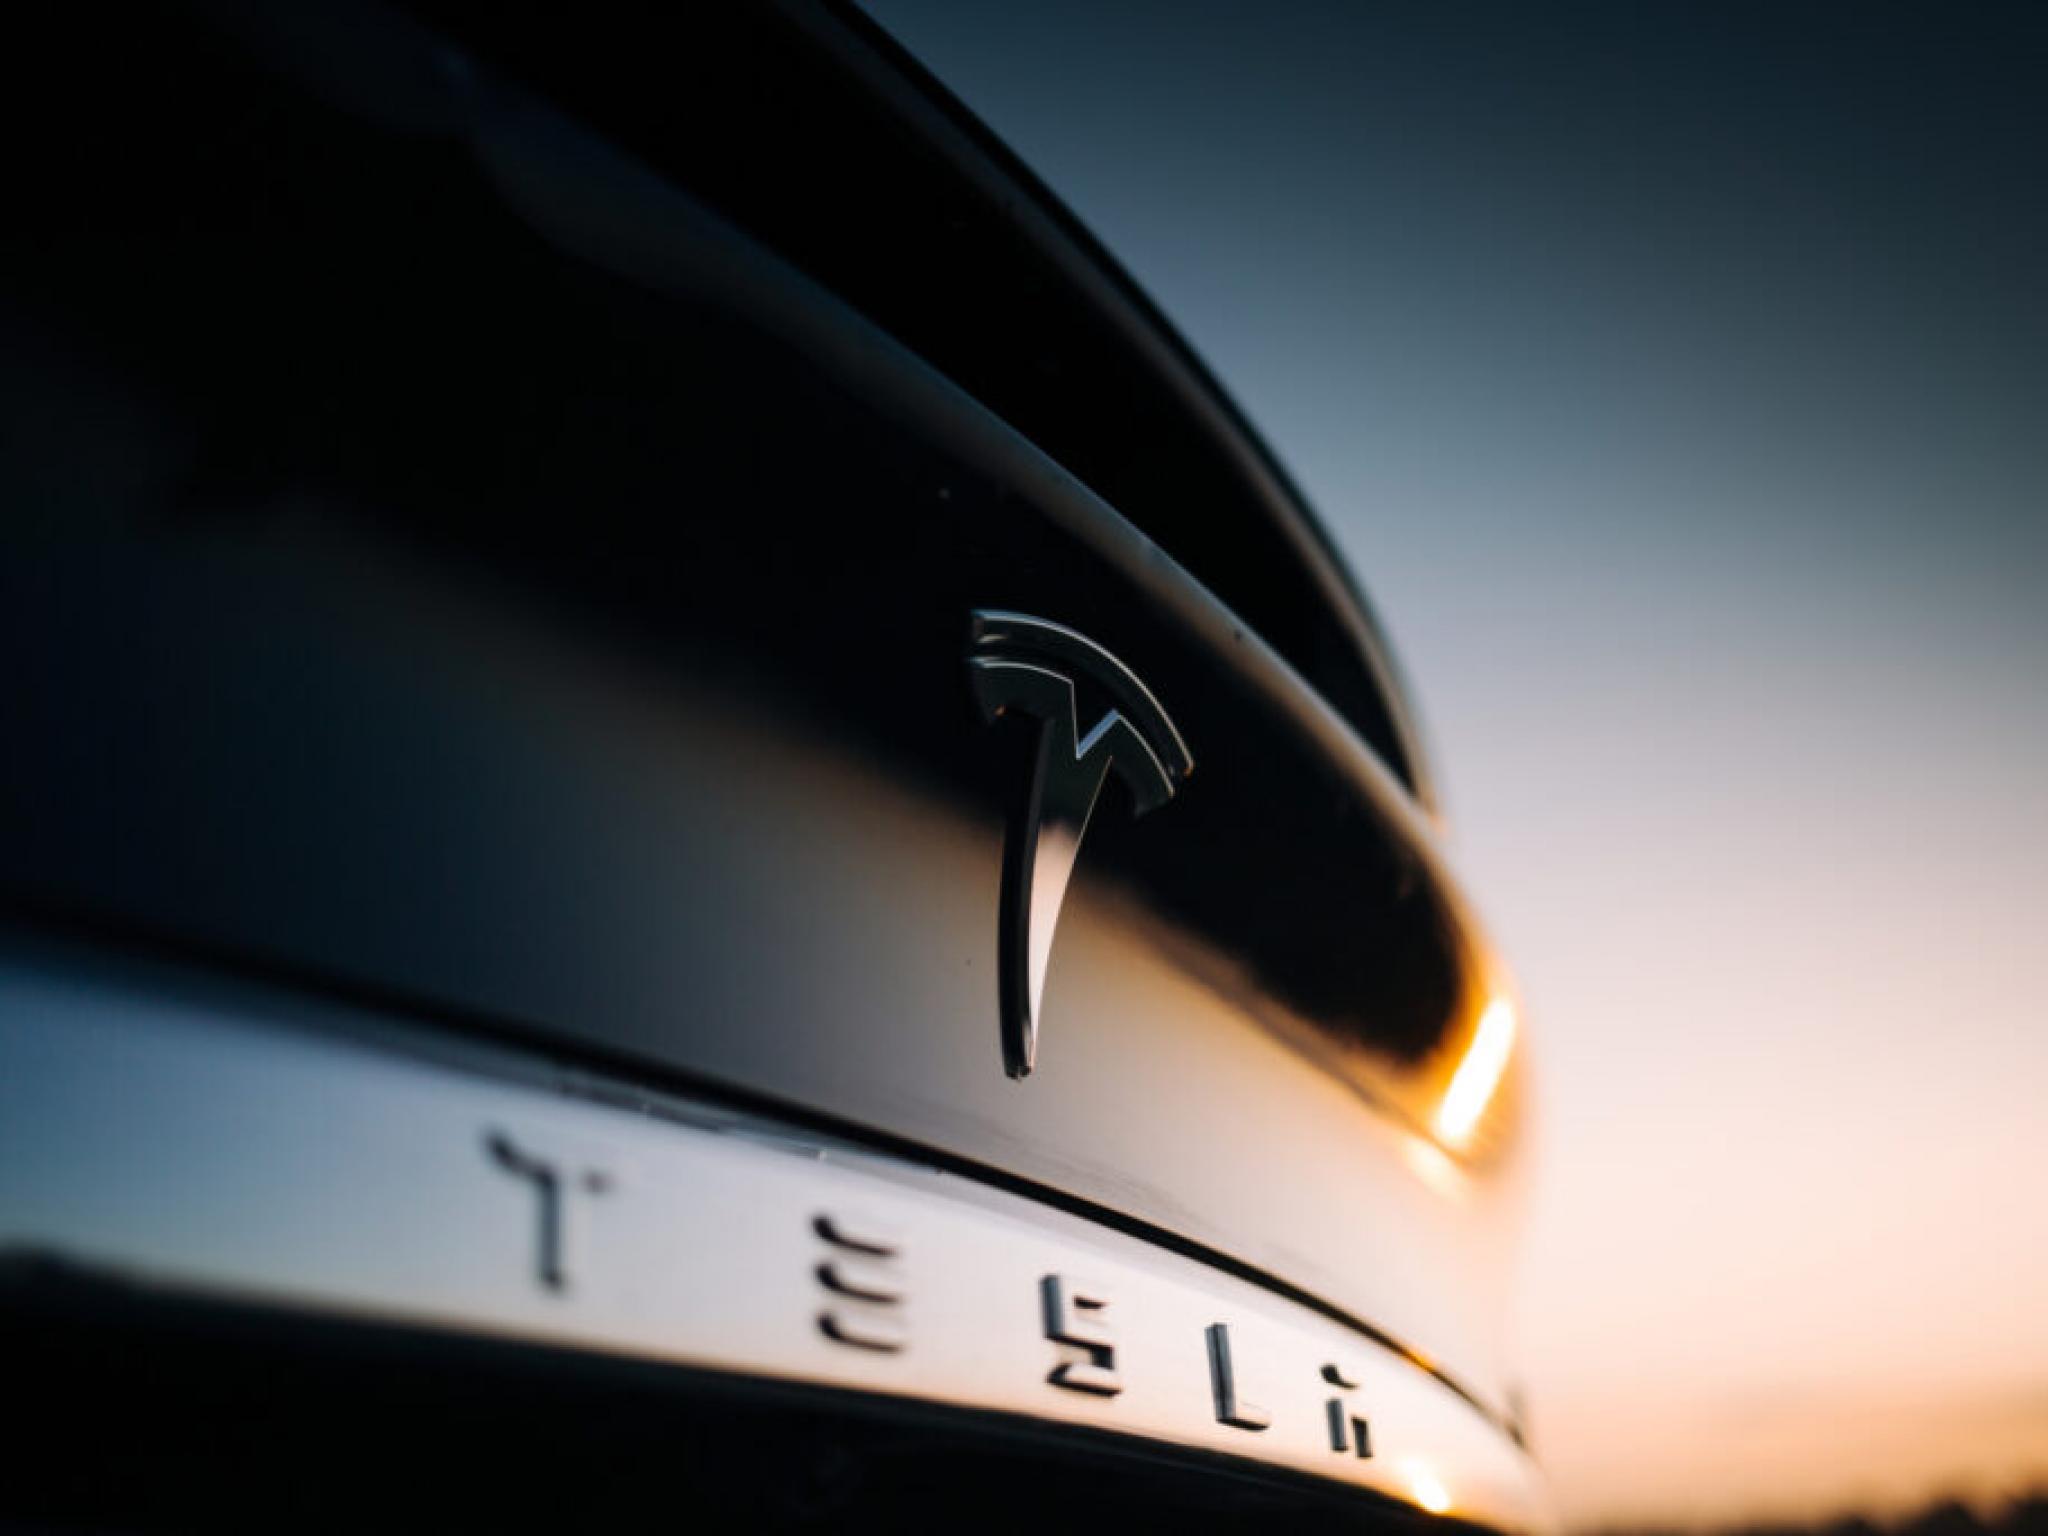  teslas-india-entry-hurdle-lifts-fisker-hurtling-toward-bankruptcy-rivian-gets-wall-streets-love-and-more-biggest-ev-stories-of-the-week 